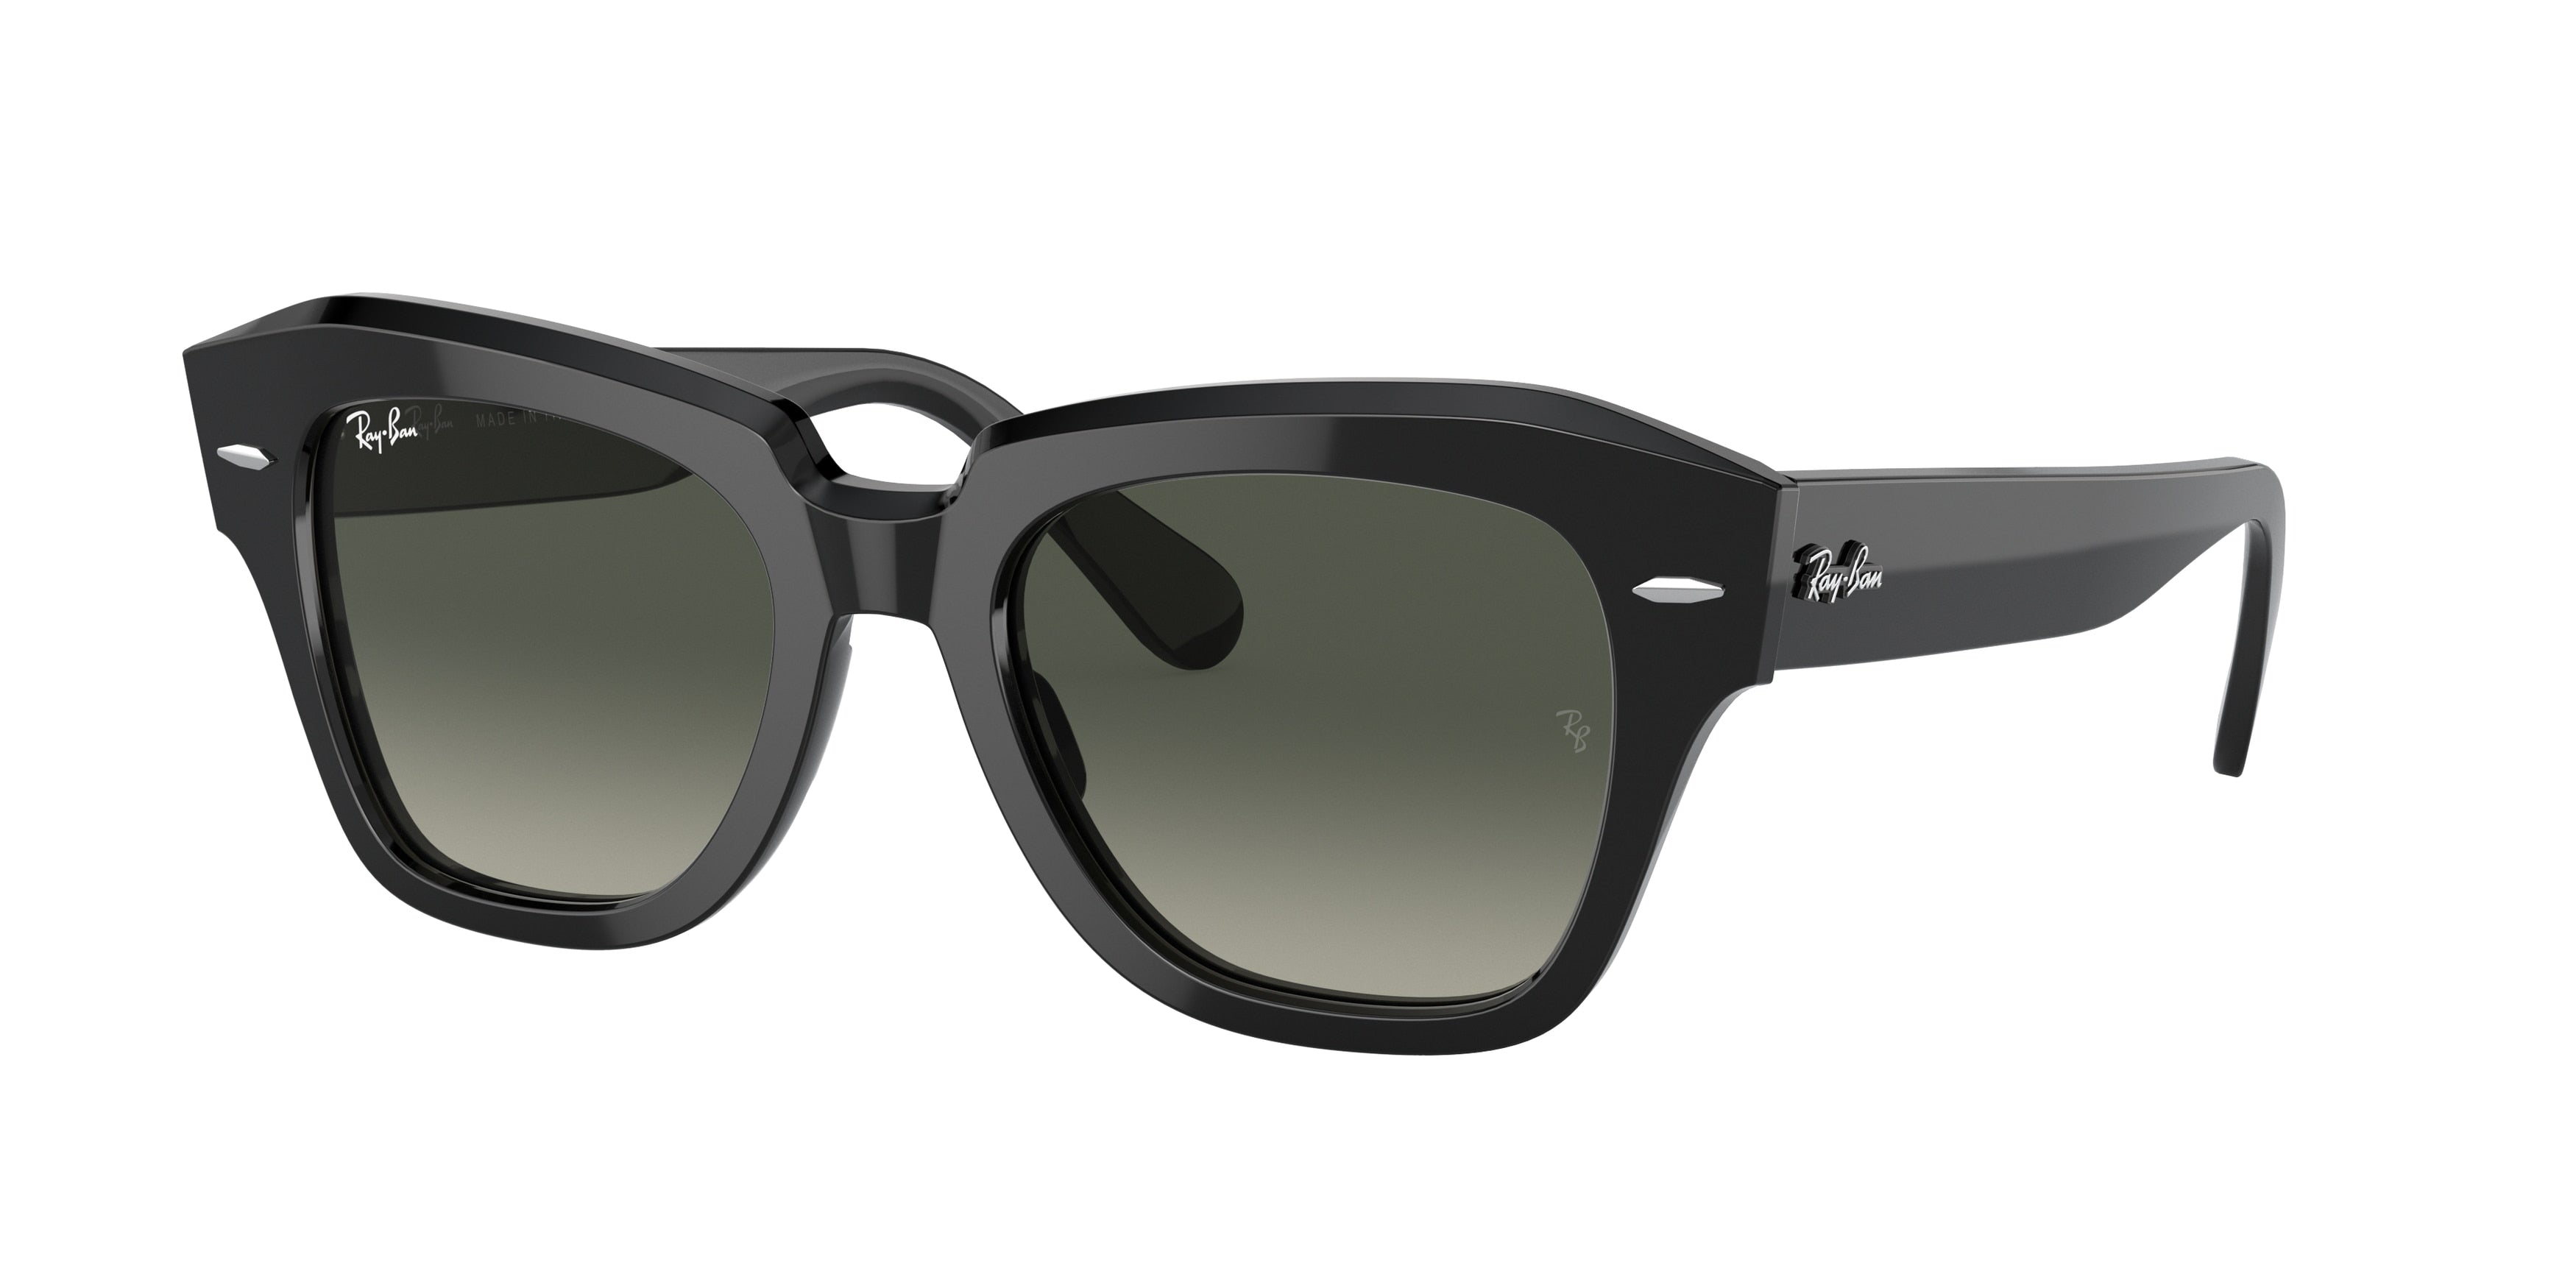 Ray-Ban STATE STREET RB2186 Square Sunglasses  901/71-Black 49-145-20 - Color Map Black